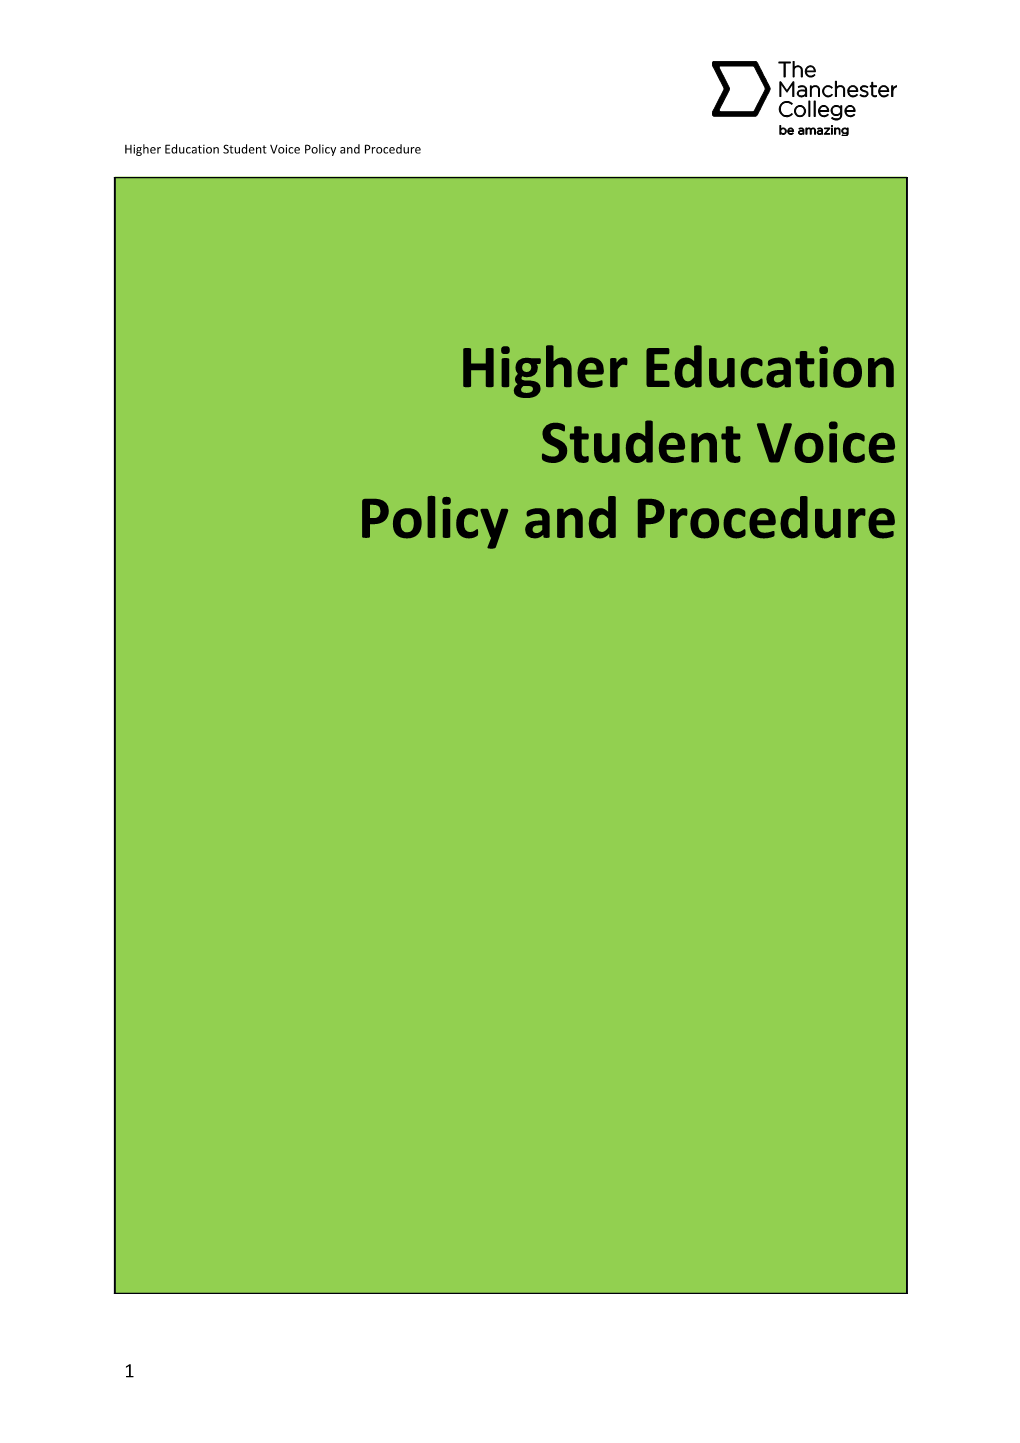 Higher Education Student Voice Policy and Procedure